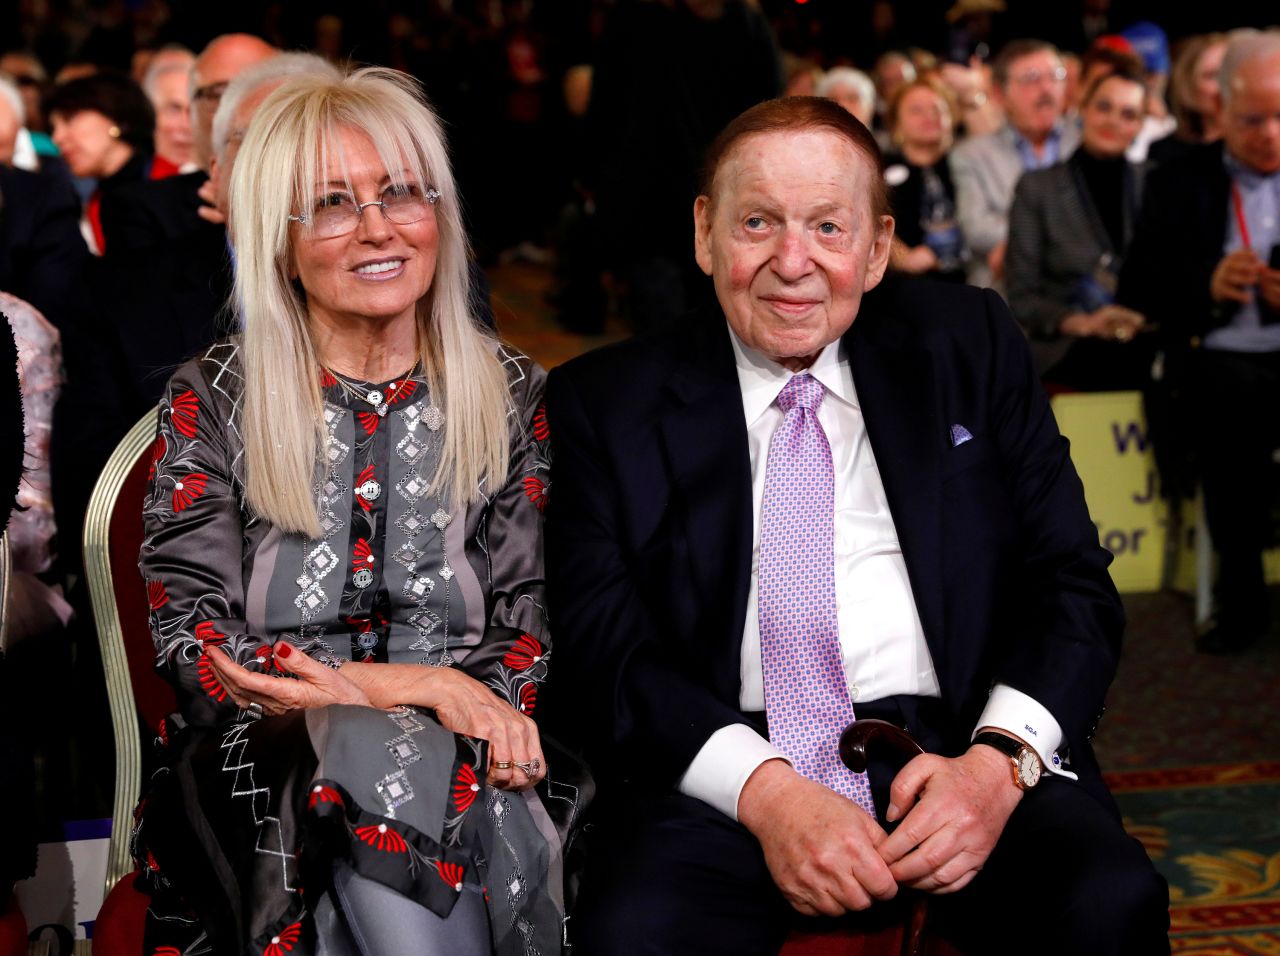 Adelson and his wife listen to Trump address the Republican Jewish Coalition in 2019.